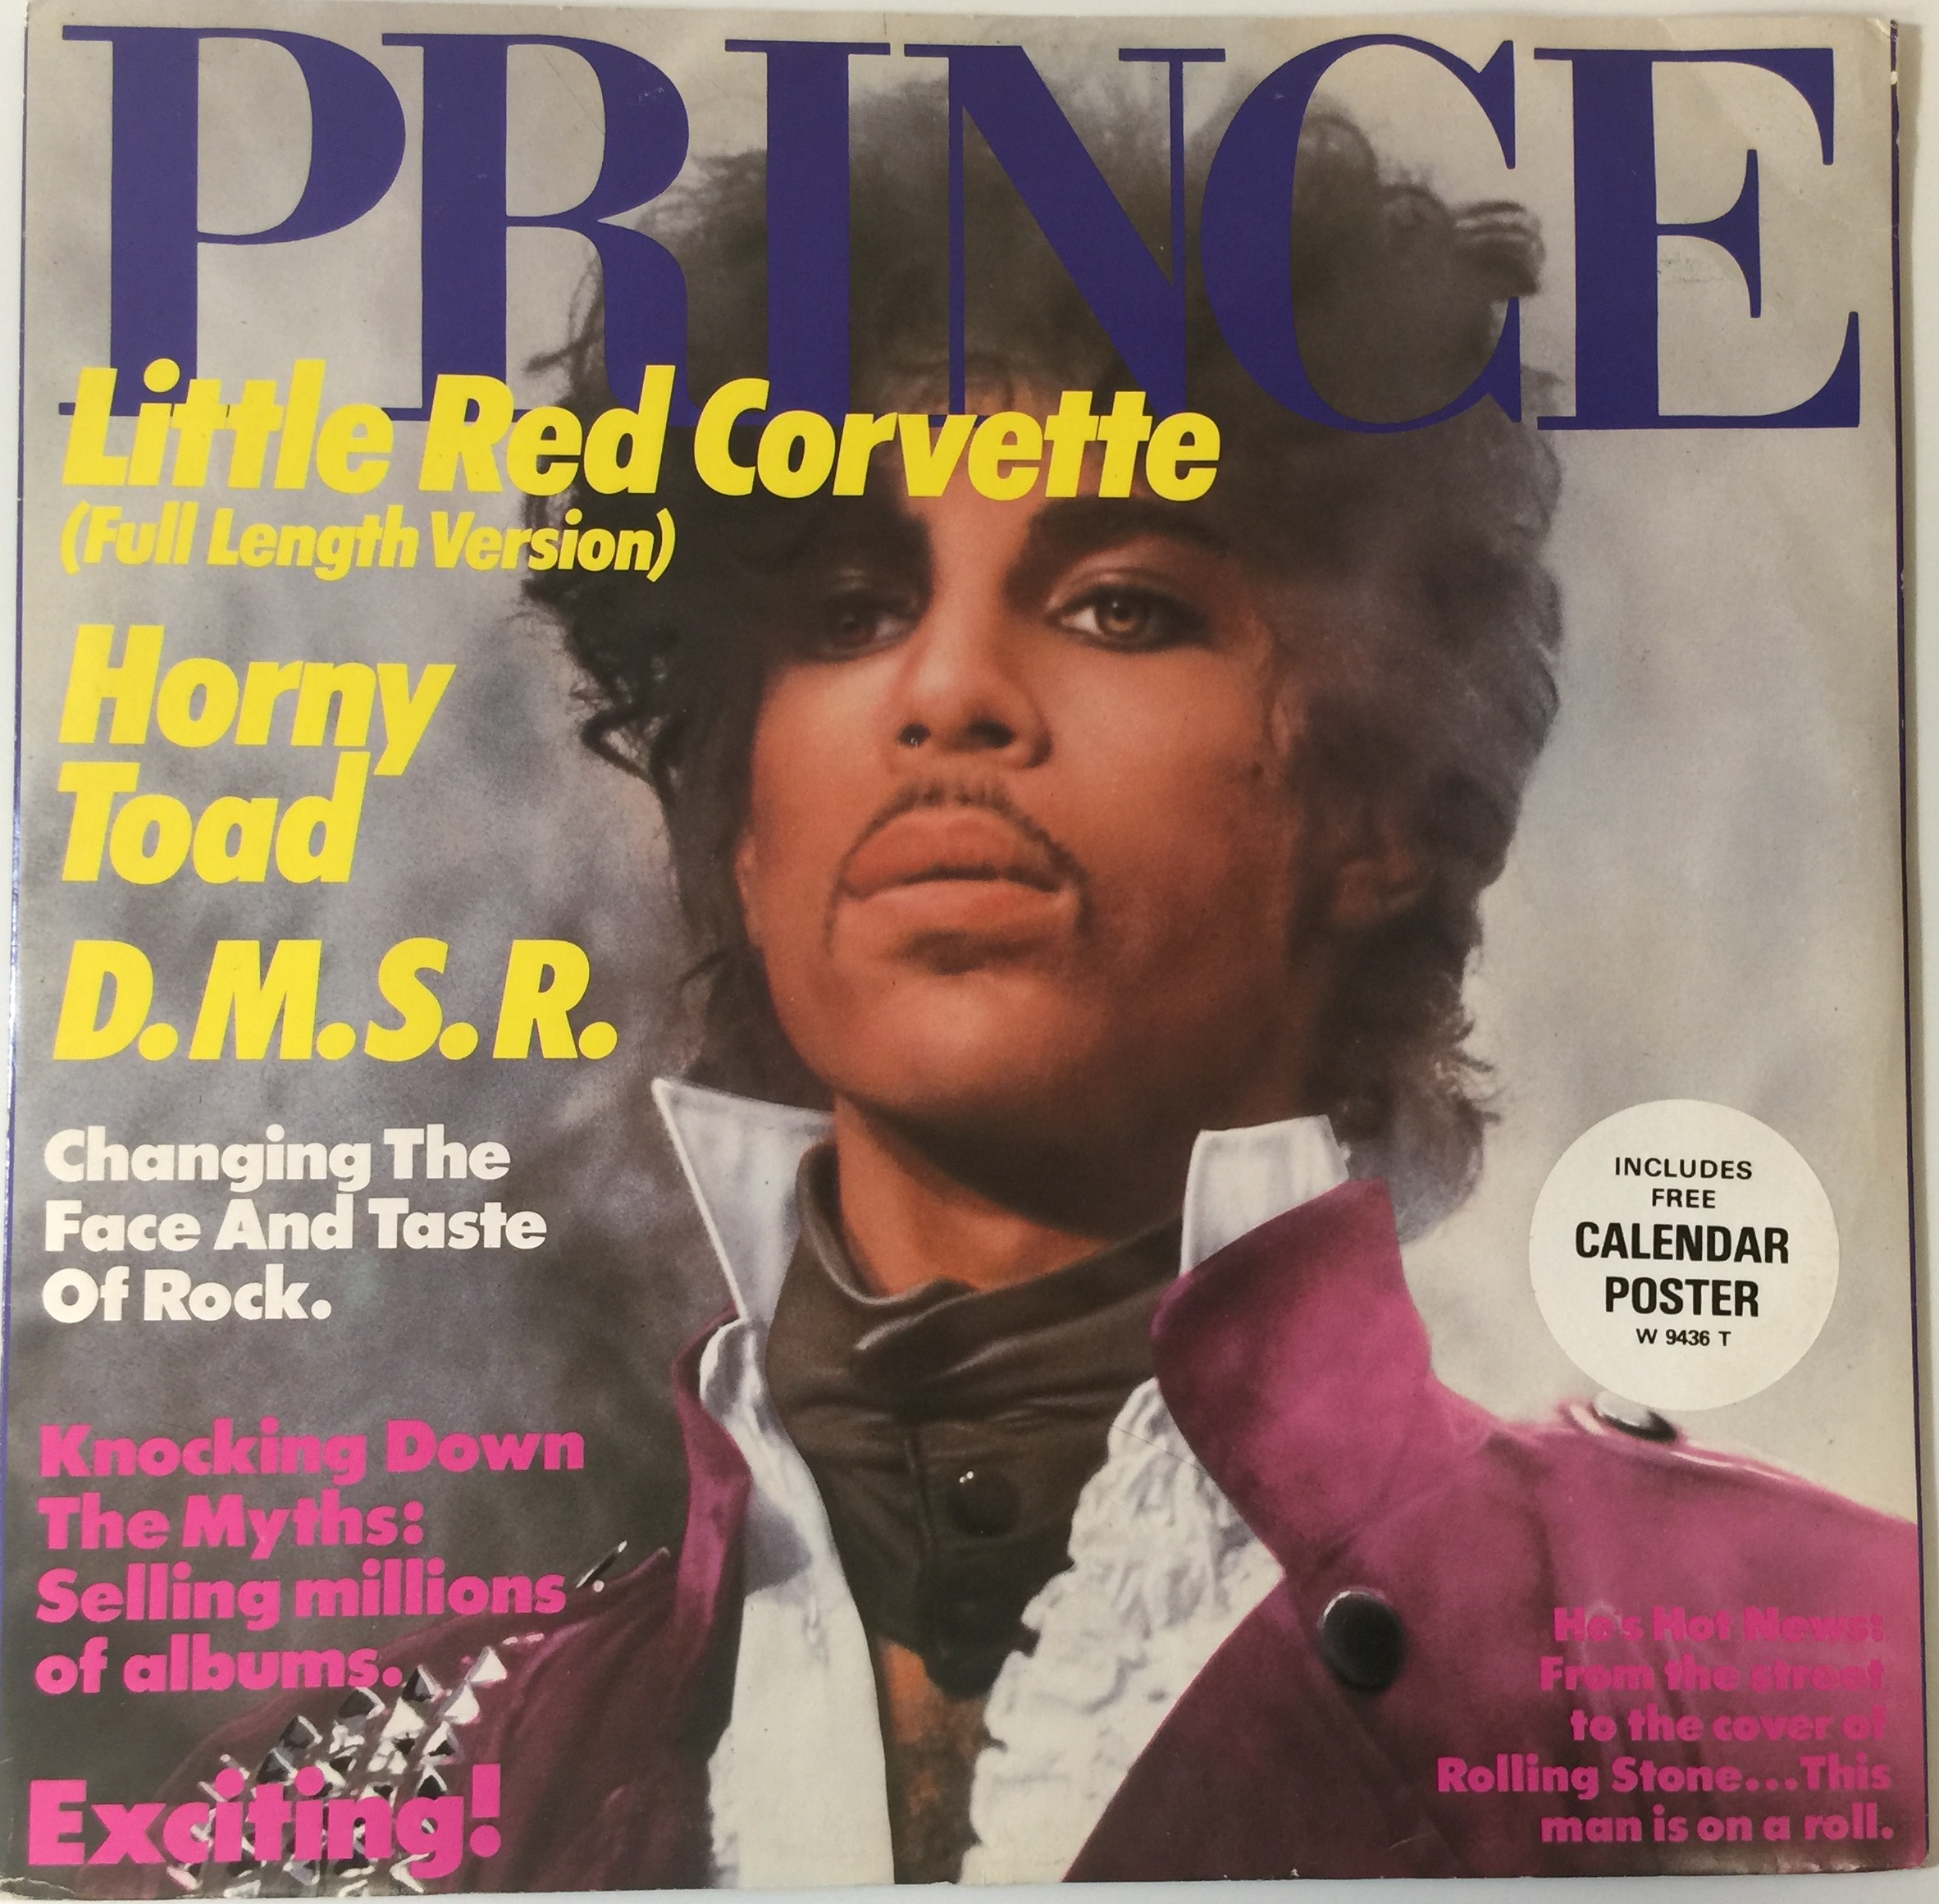 PRINCE - LITTLE RED CORVETTE 12" (WITH CALENDAR - W 9436 T).